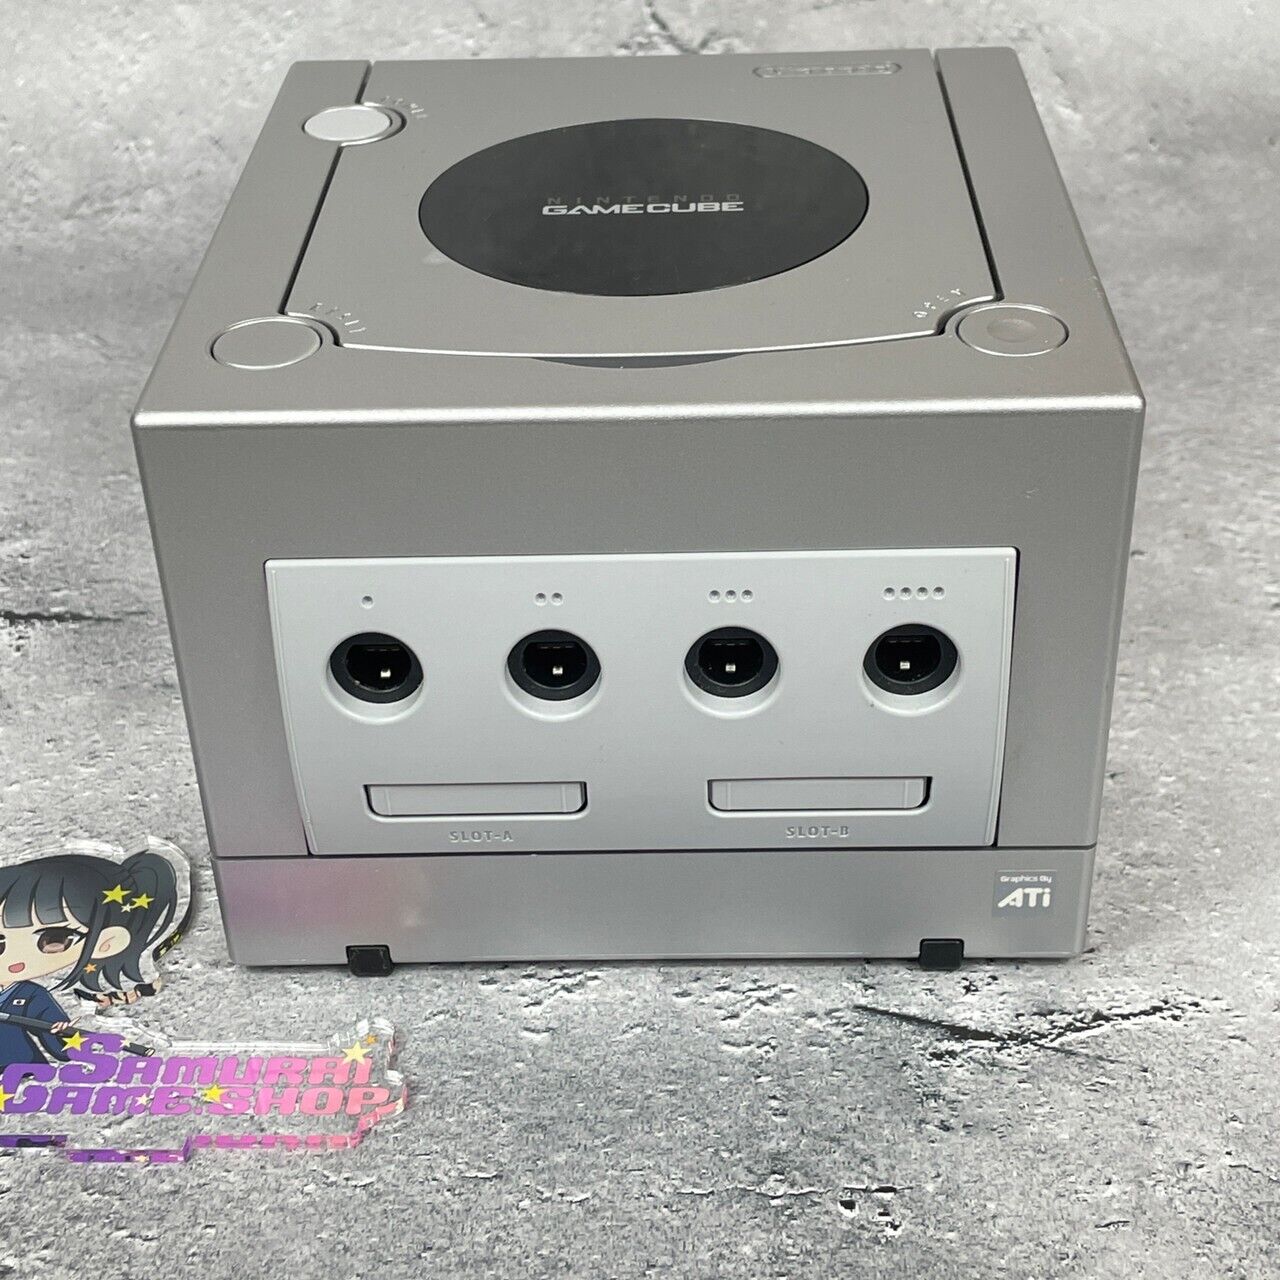 Nintendo GameCube Console with Choice OEM Controller Cable Japanese Language ver